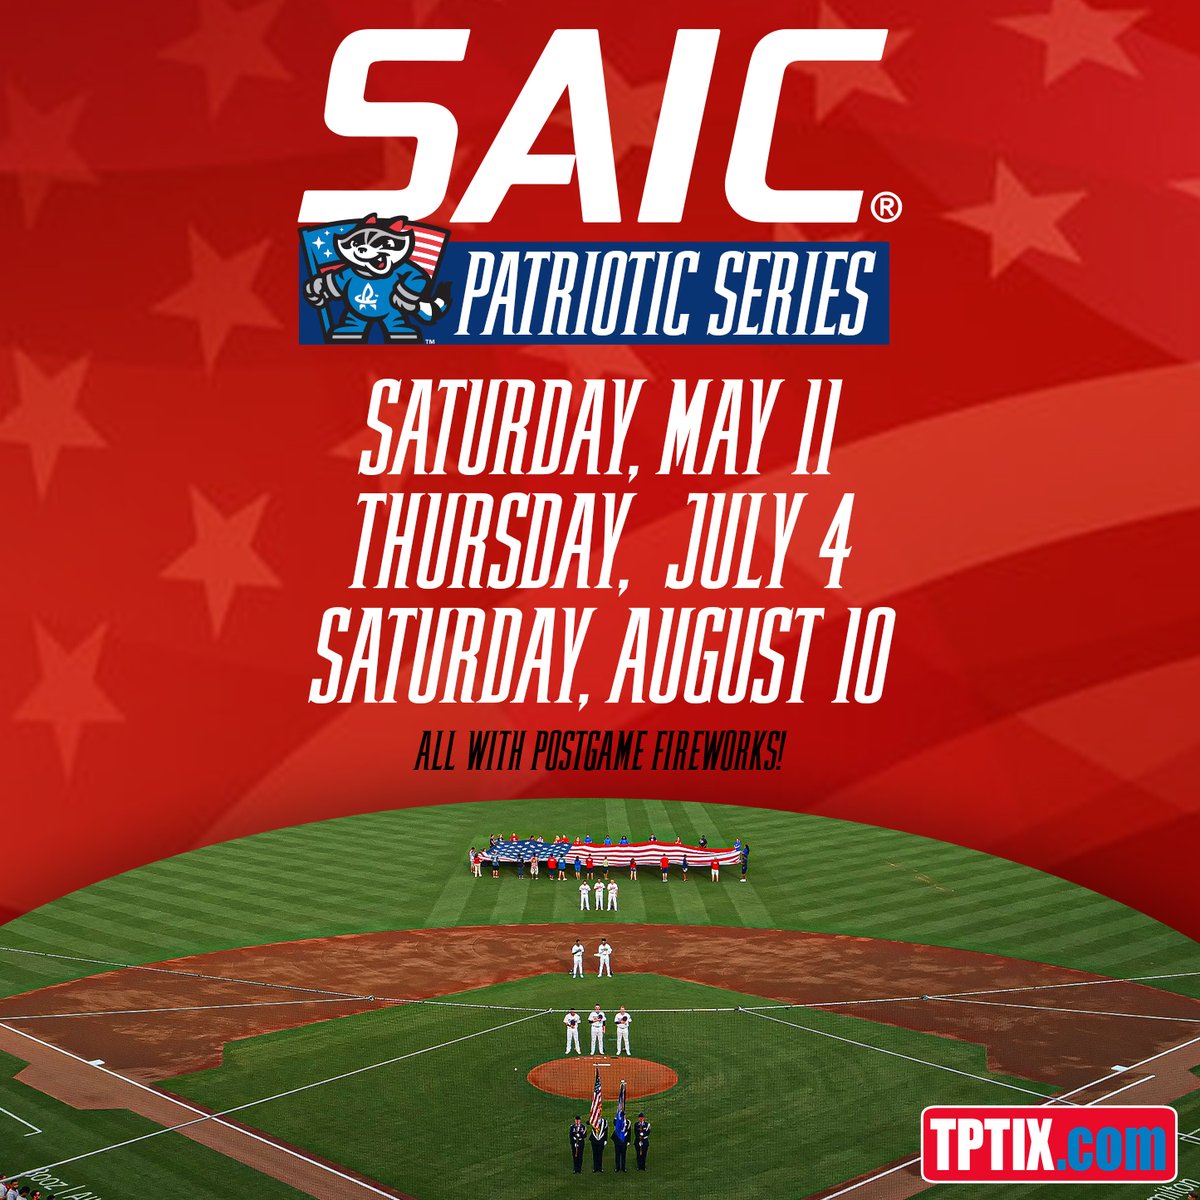 Our first @SAICinc Patriotic Series game is this Saturday for Armed Forces Night! 🇺🇸 We'll have a postgame fireworks show, and you can get your seats at tptix.com! 🎆